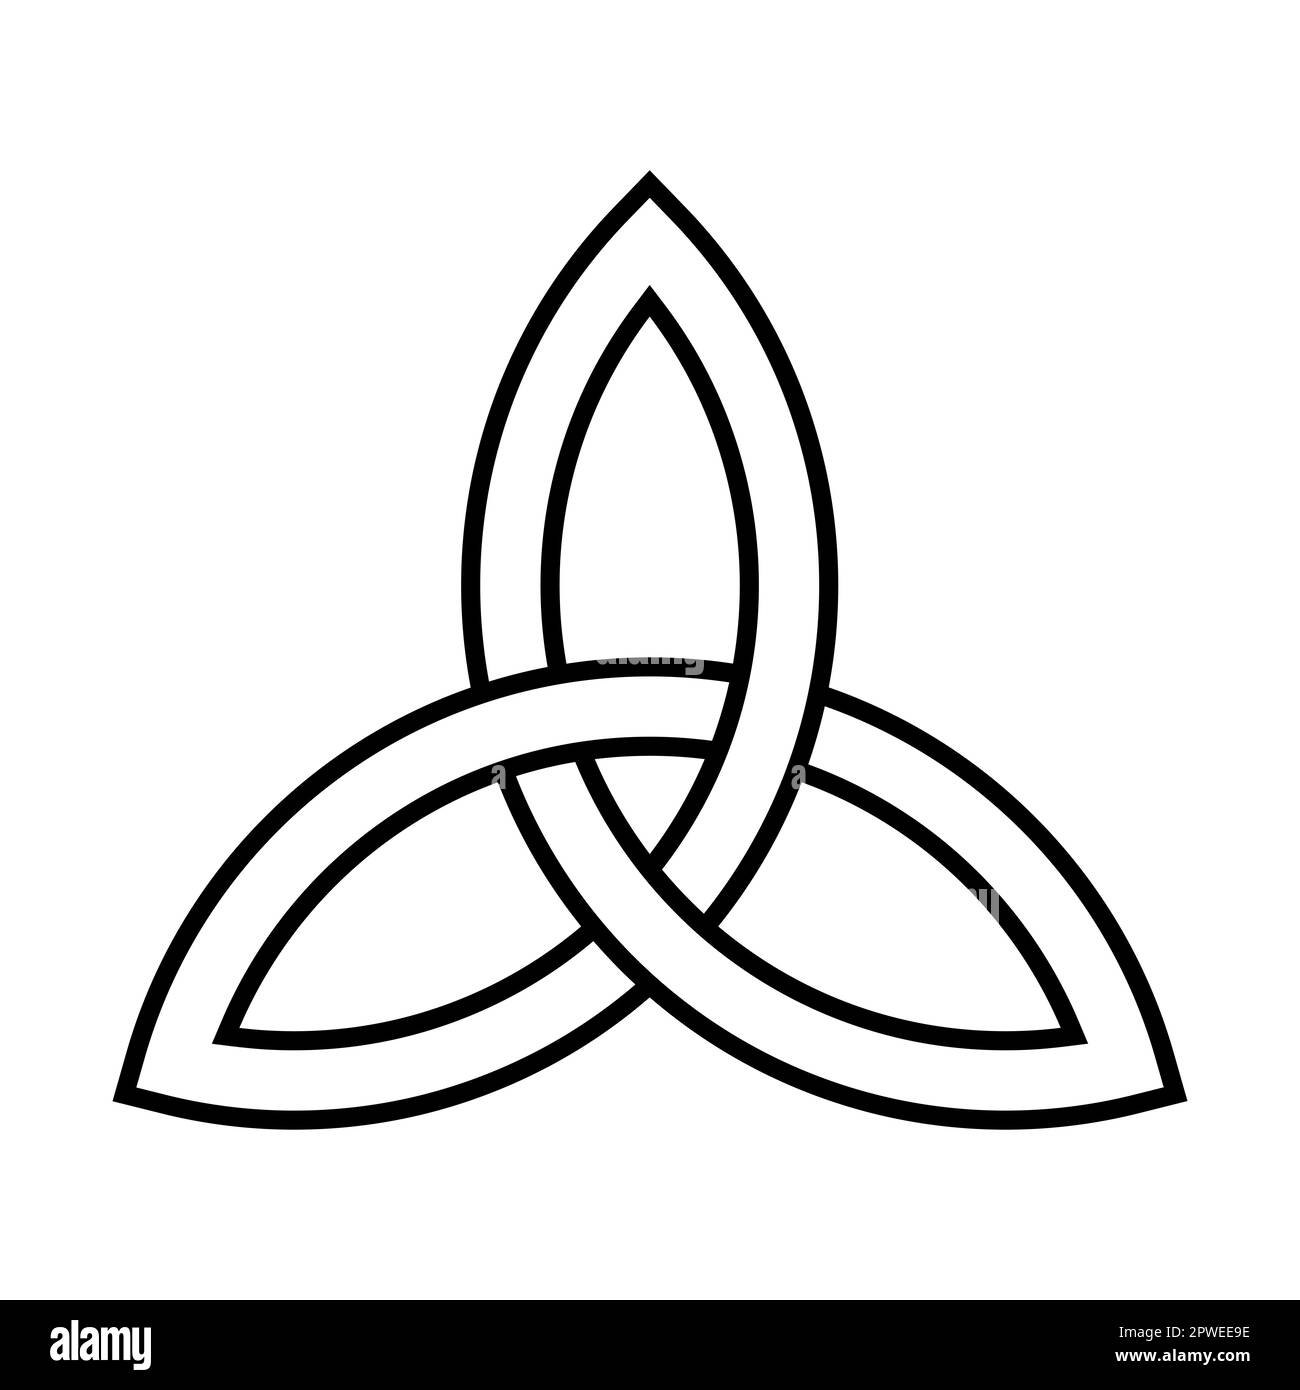 Triquetra, an emblem of the Trinity, formed by the interlacing of three equal arcs or portions of circles. Celtic triangular knot. Stock Photo